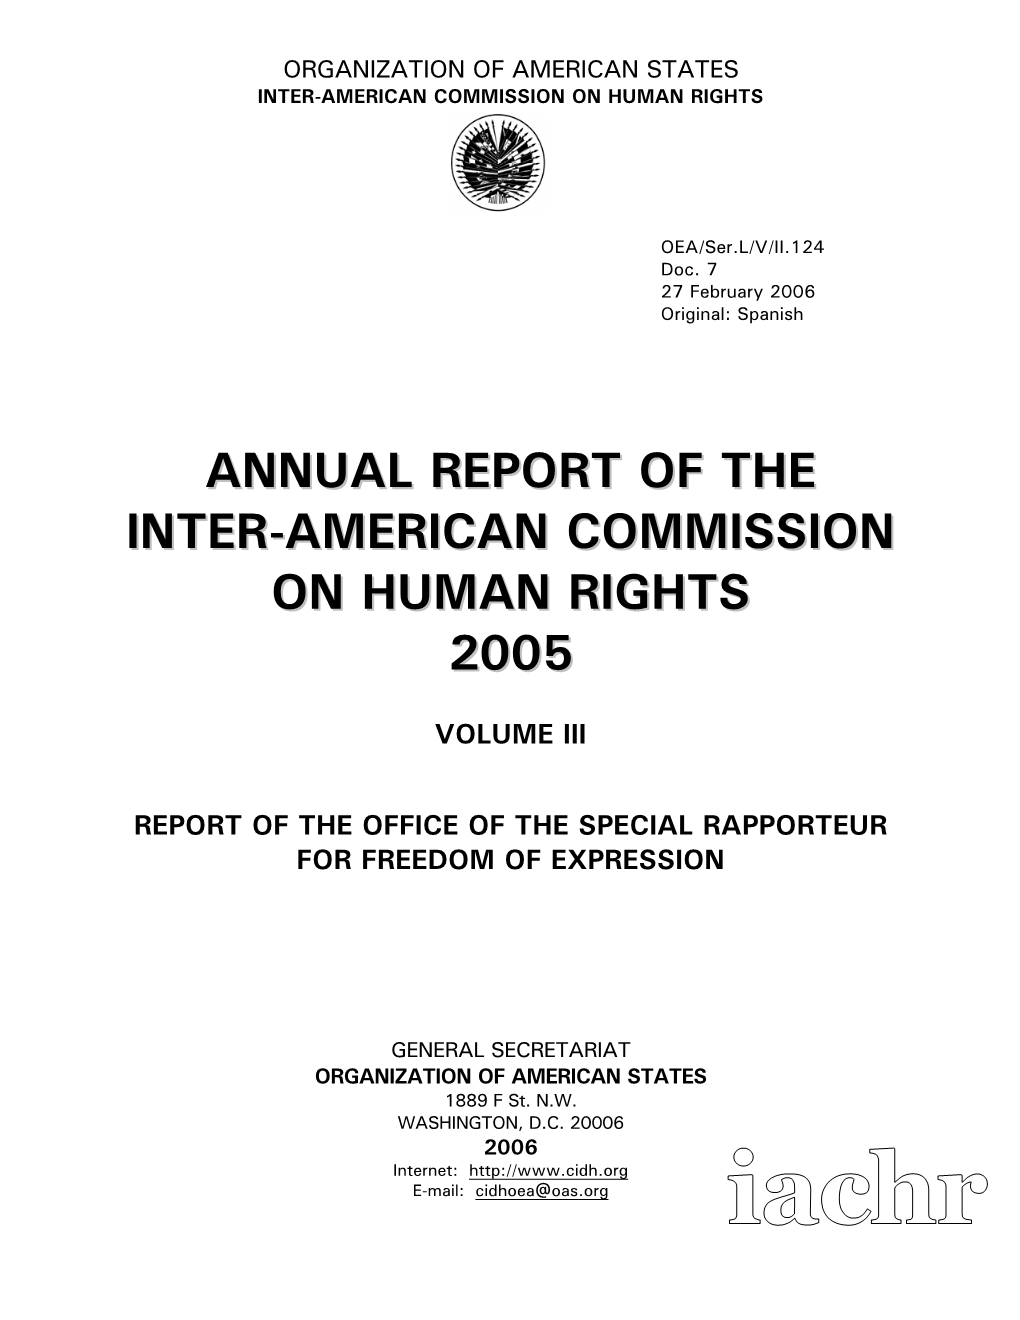 Annual Report, the Office of the Special Rapporteur for Freedom